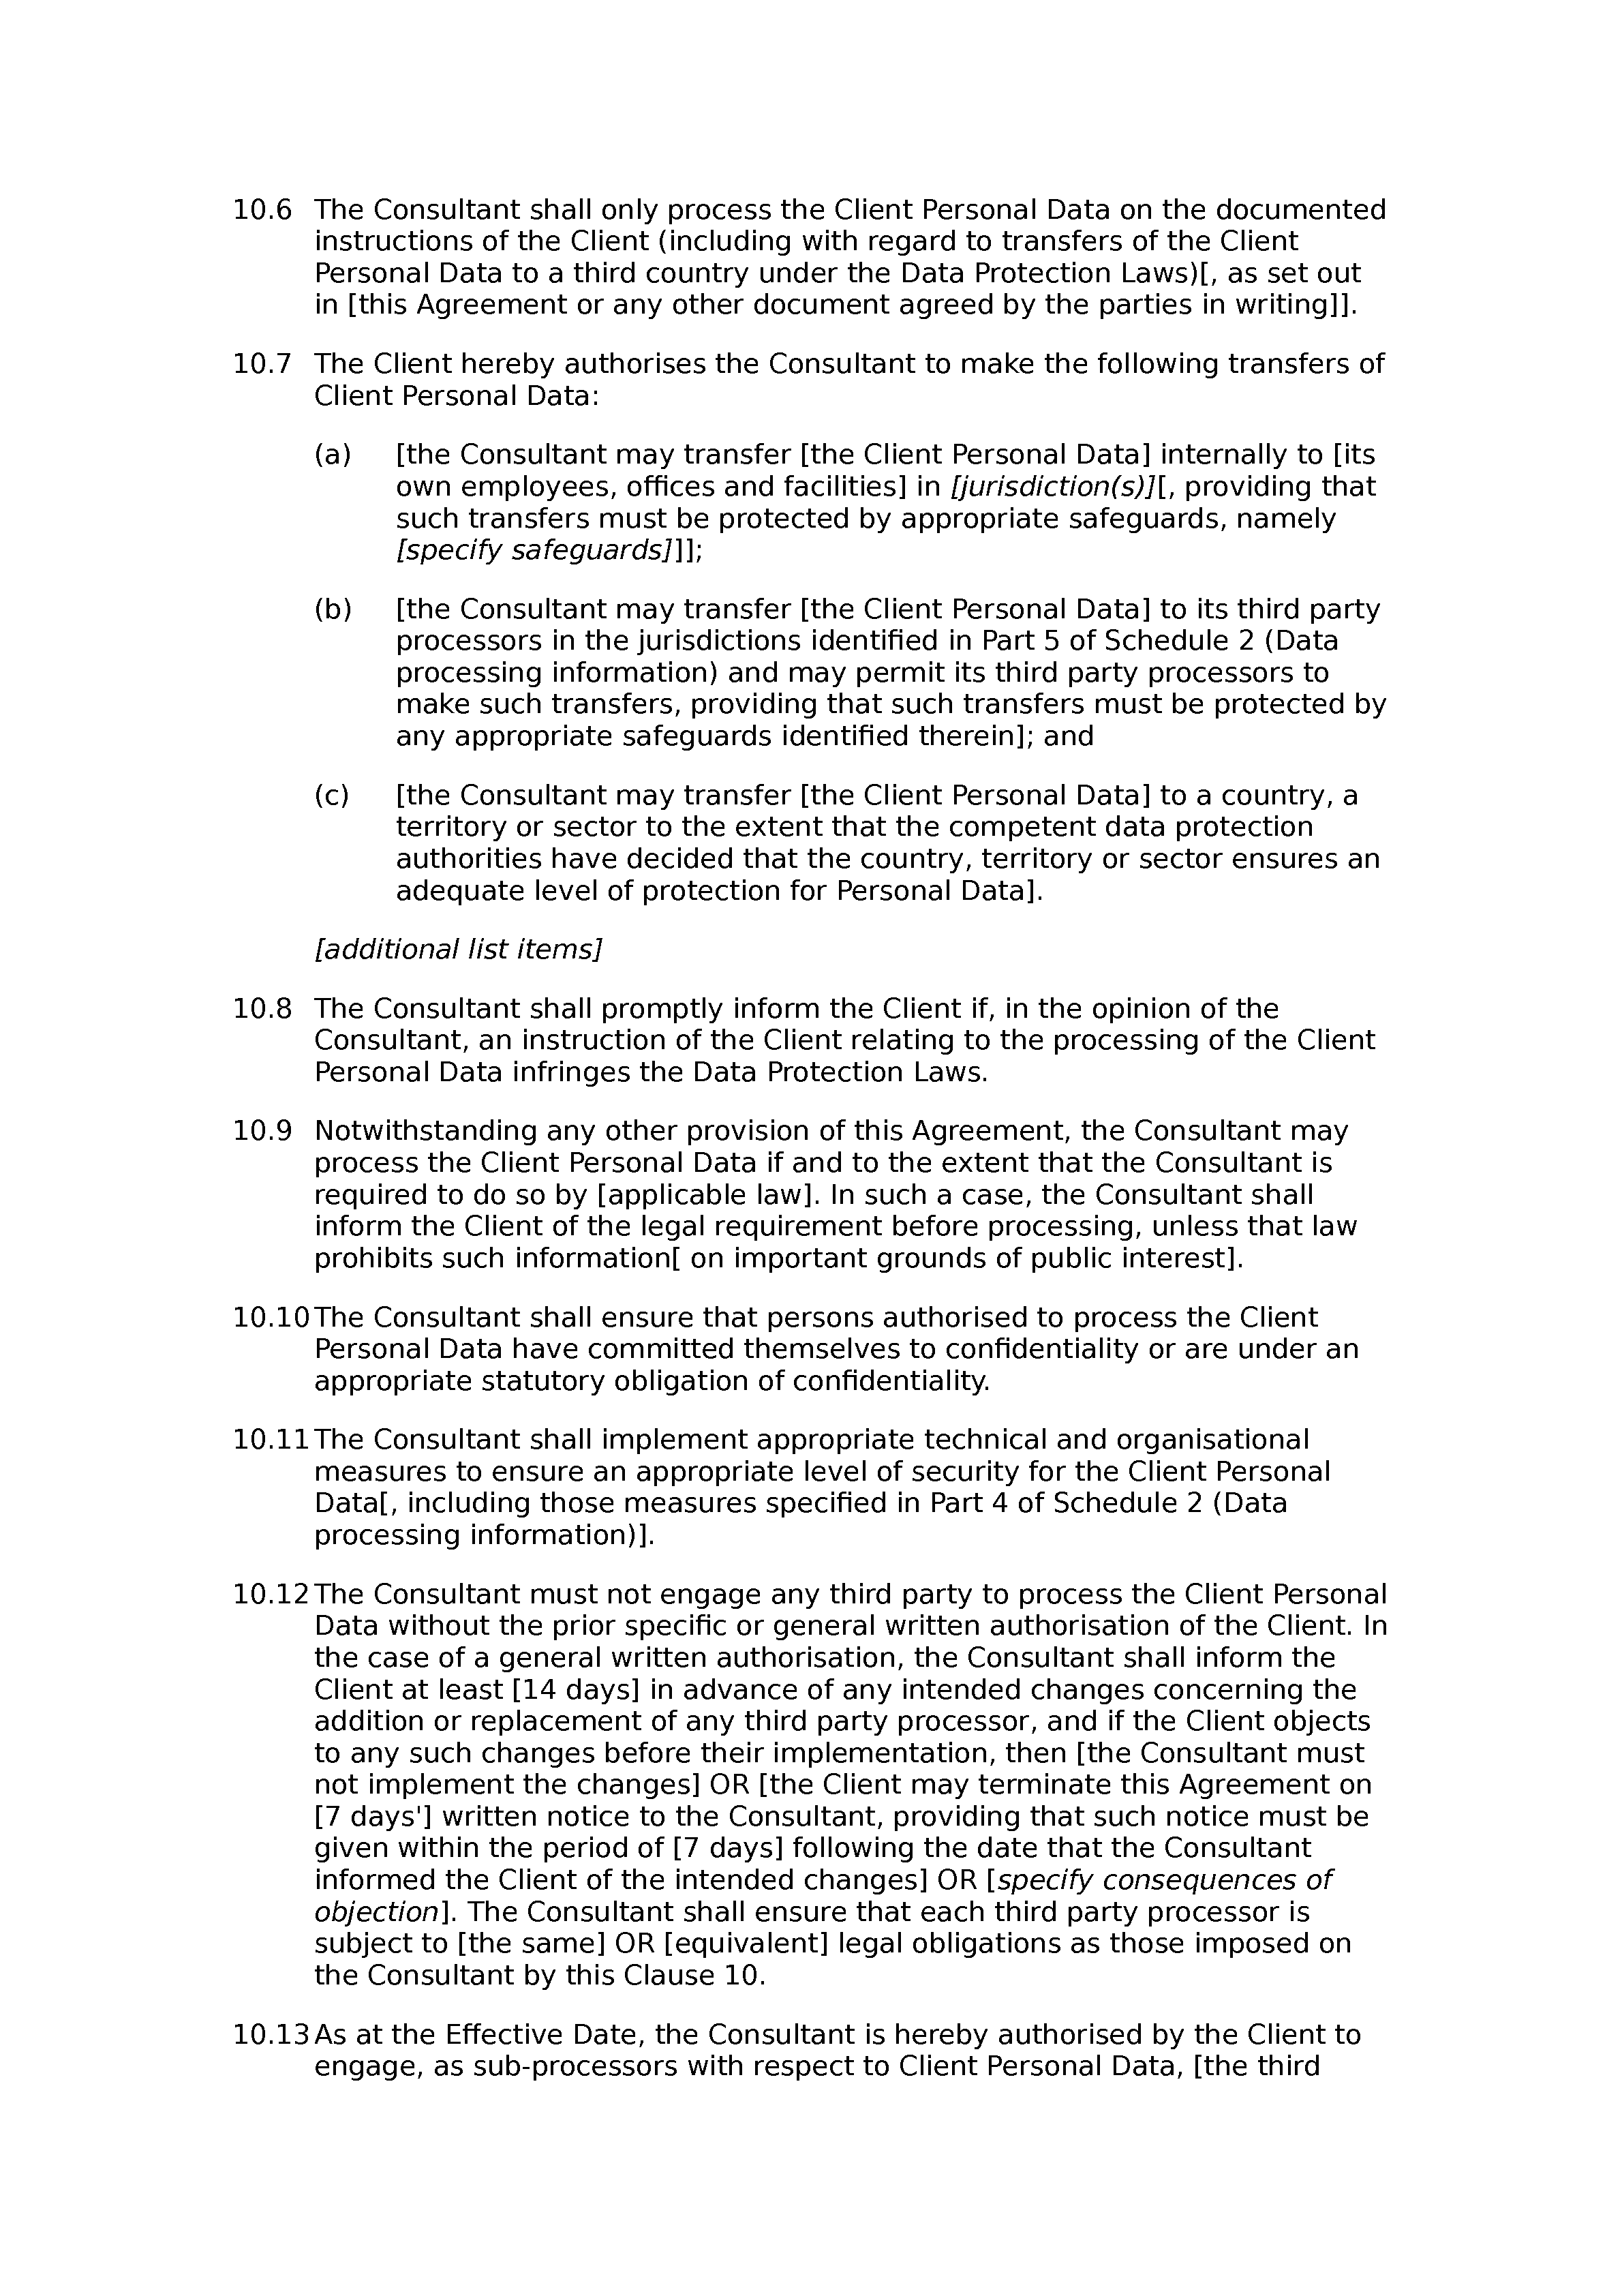 Consultancy agreement (standard) document preview